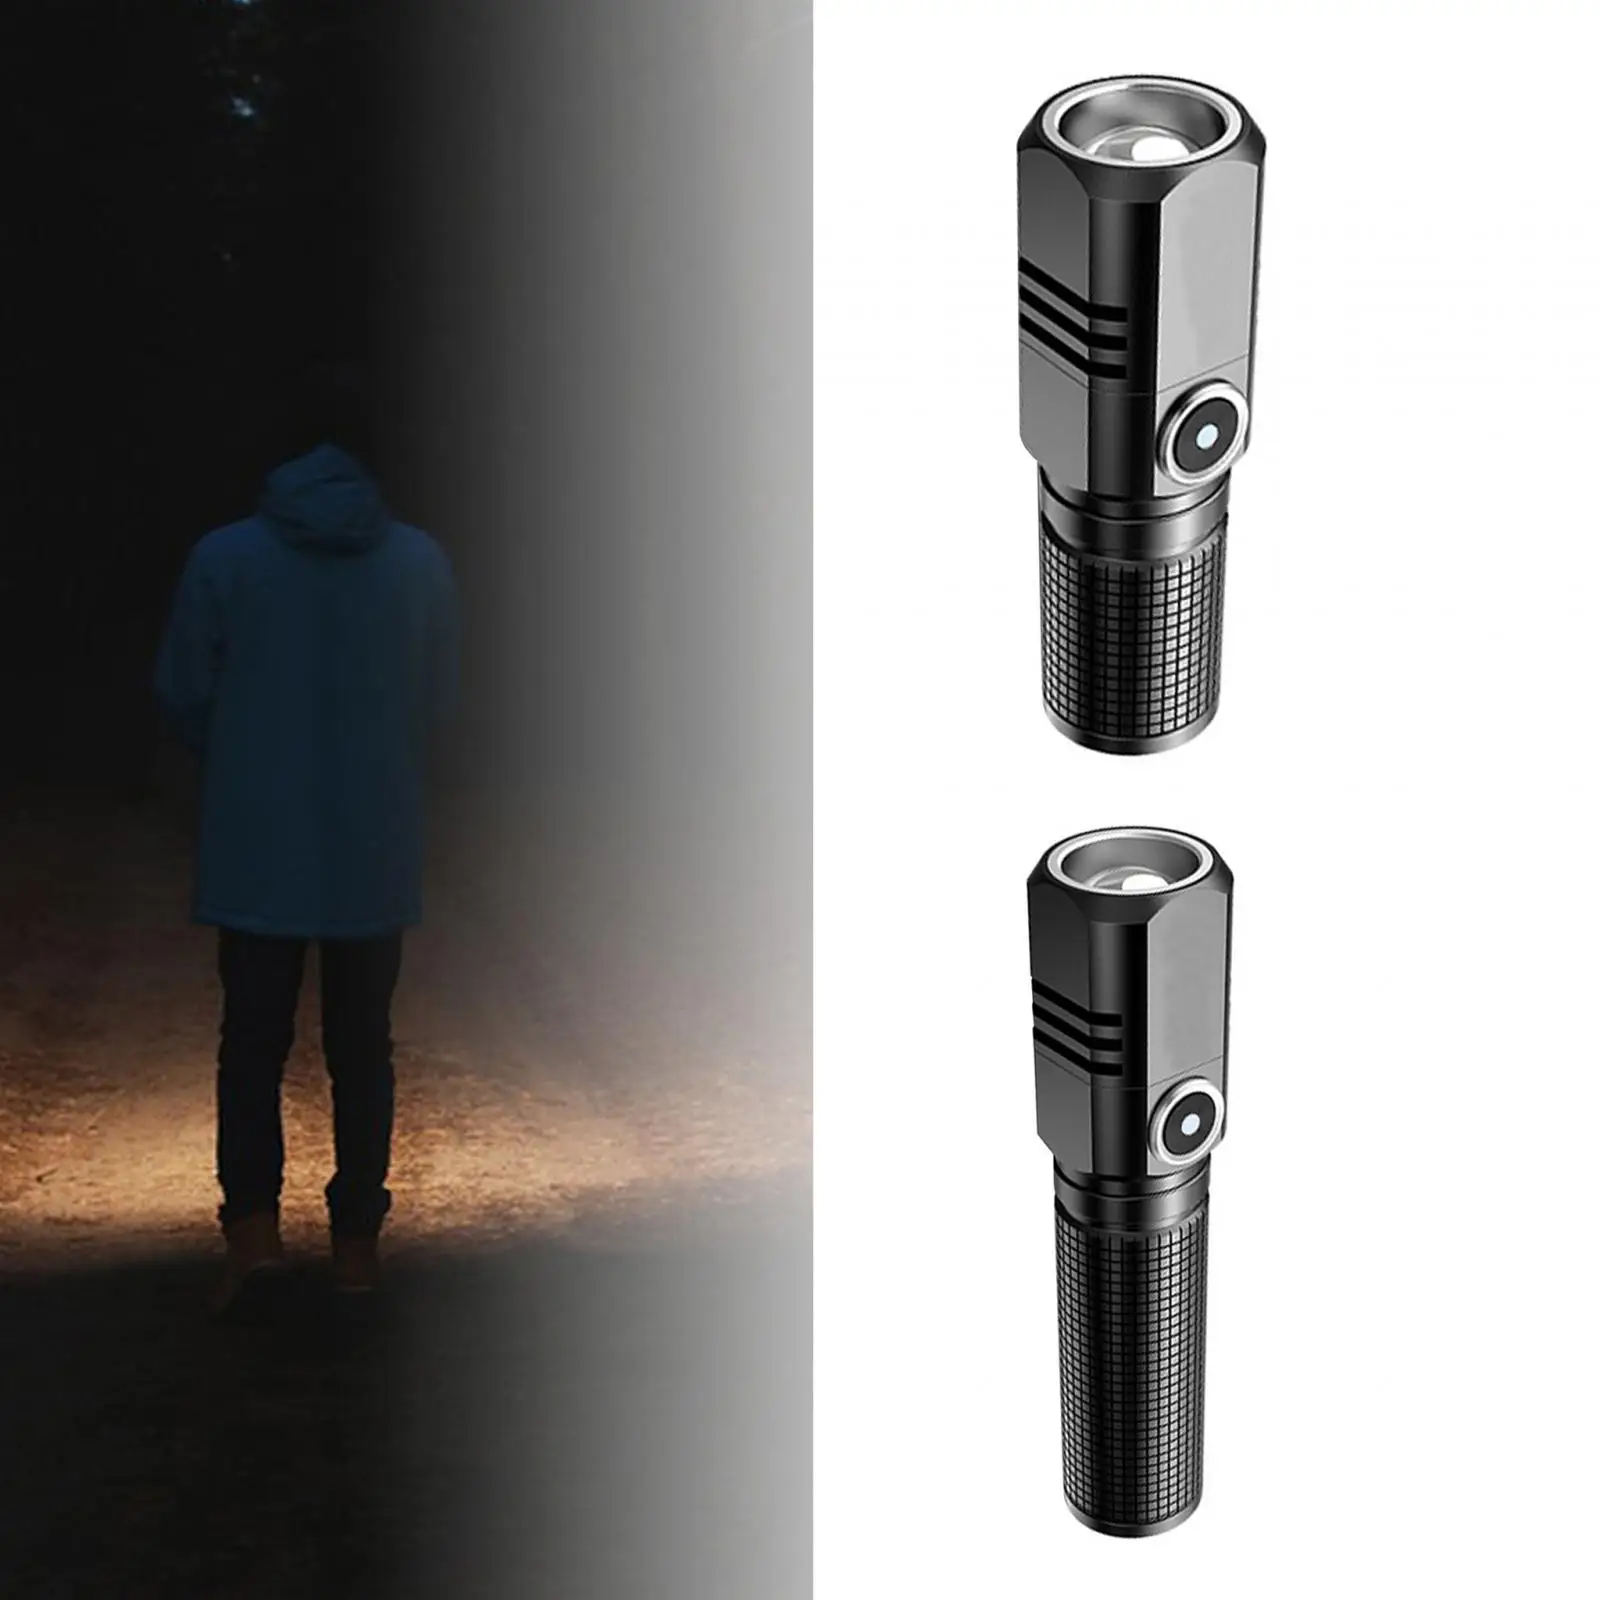 Mini Flashlight LED Flashlight 3 Modes Torch Compact Waterproof Handheld Torch Light for Climbing Travel Hiking Working Camping